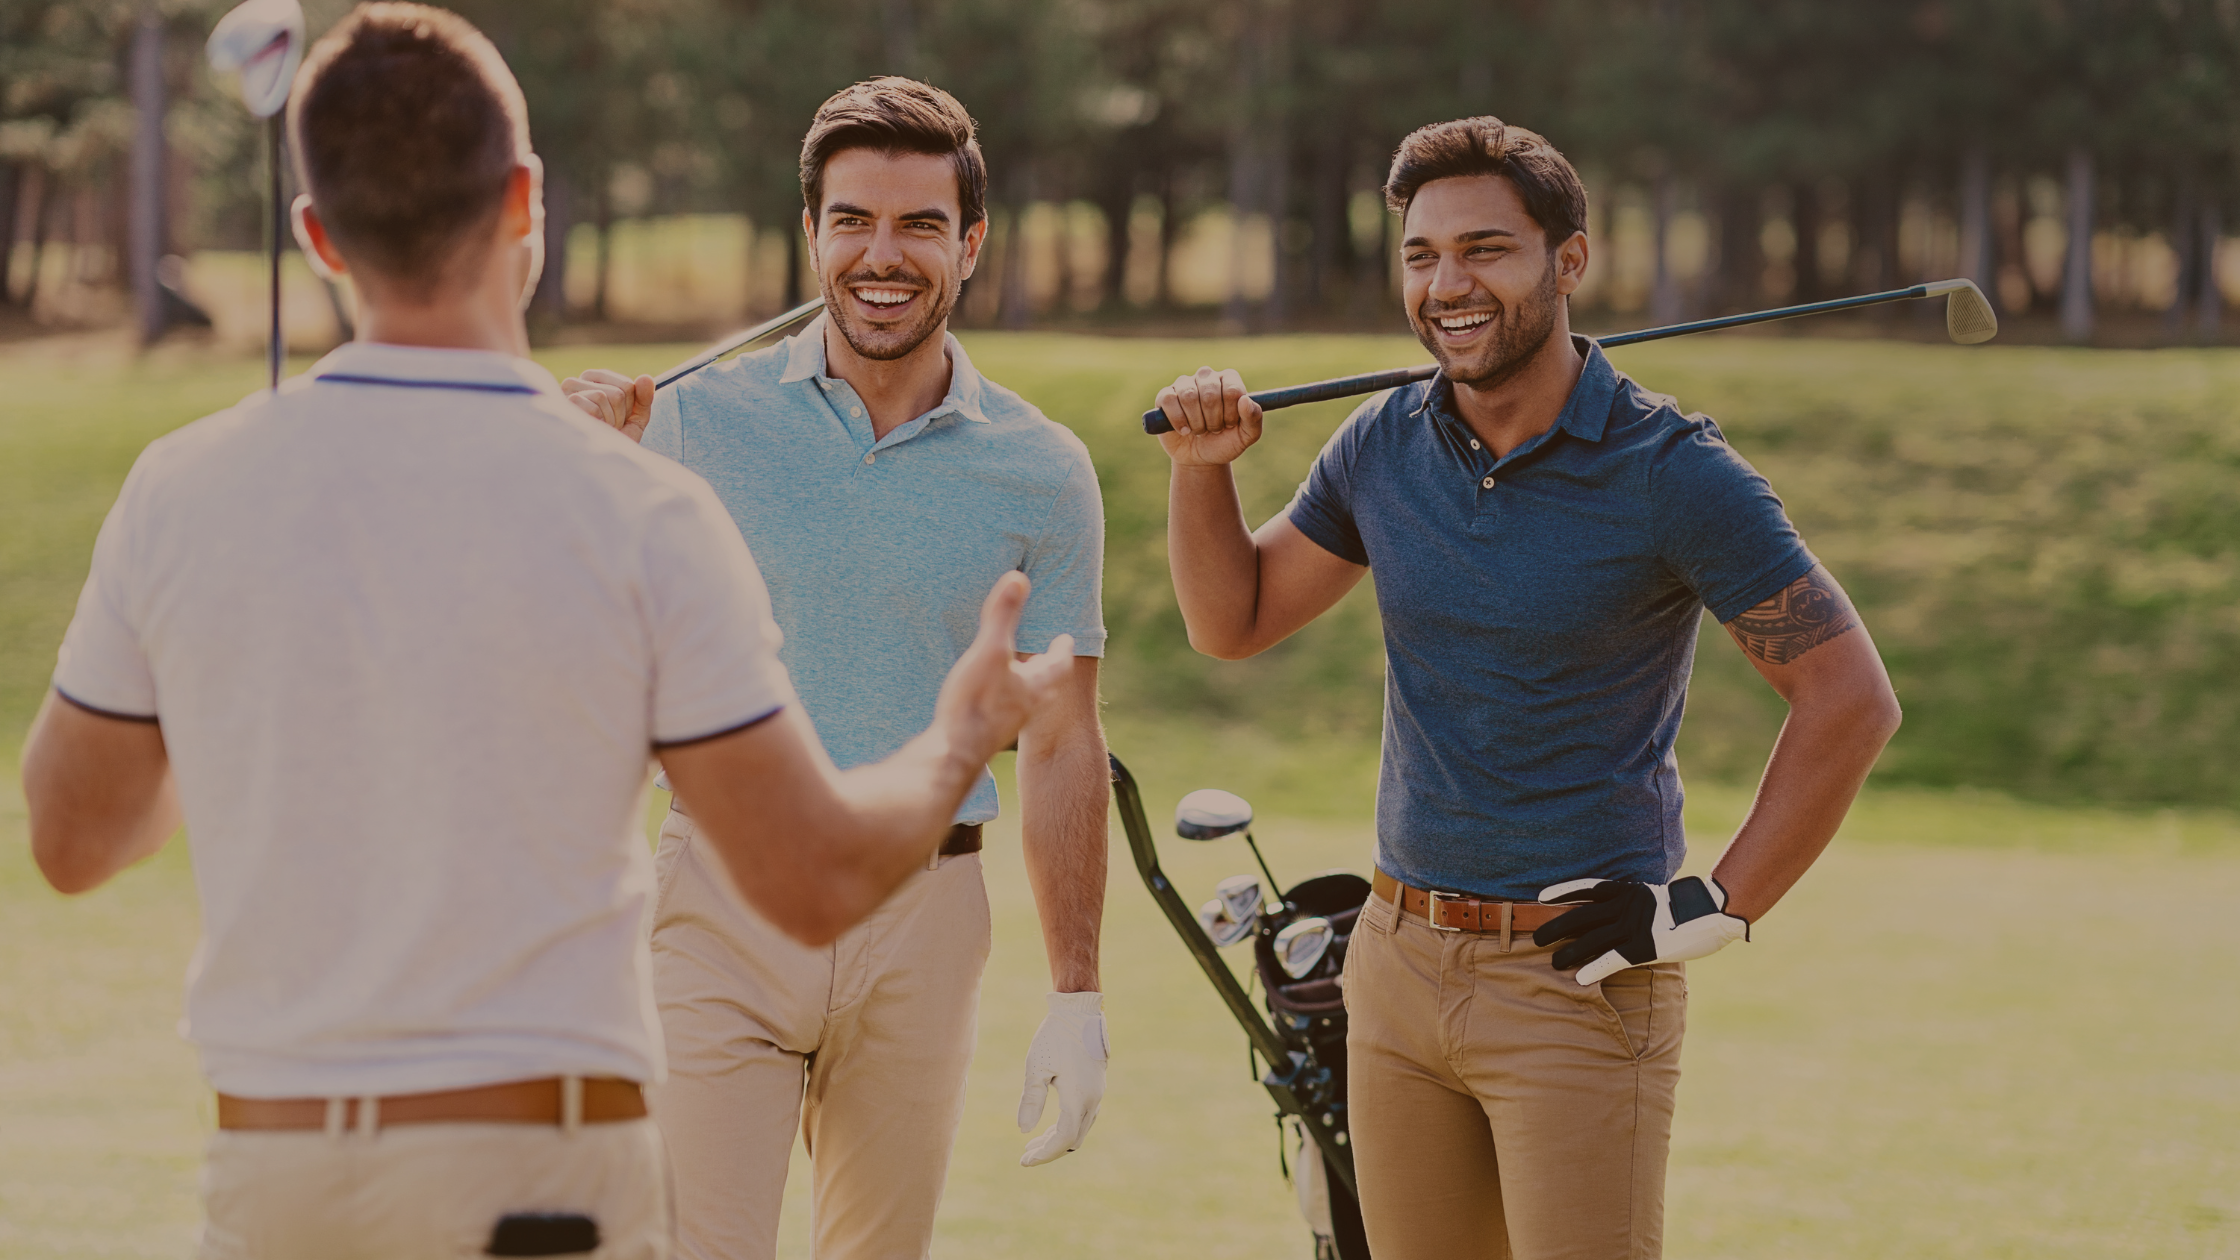 The Health Benefits and Challenges of Playing Golf